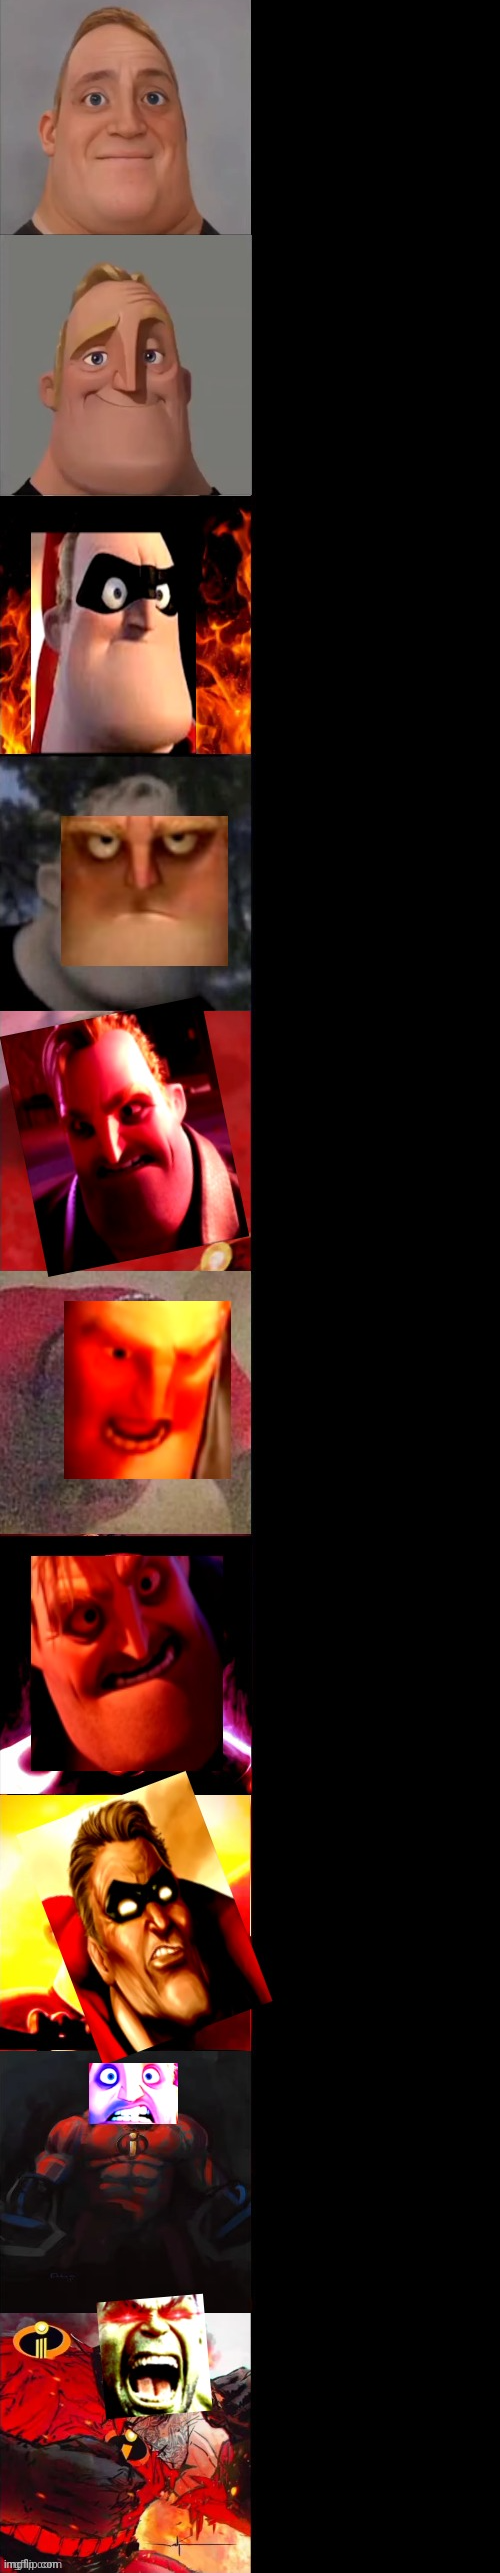 Mr incredible becoming Evil+angry Template Blank Meme Template